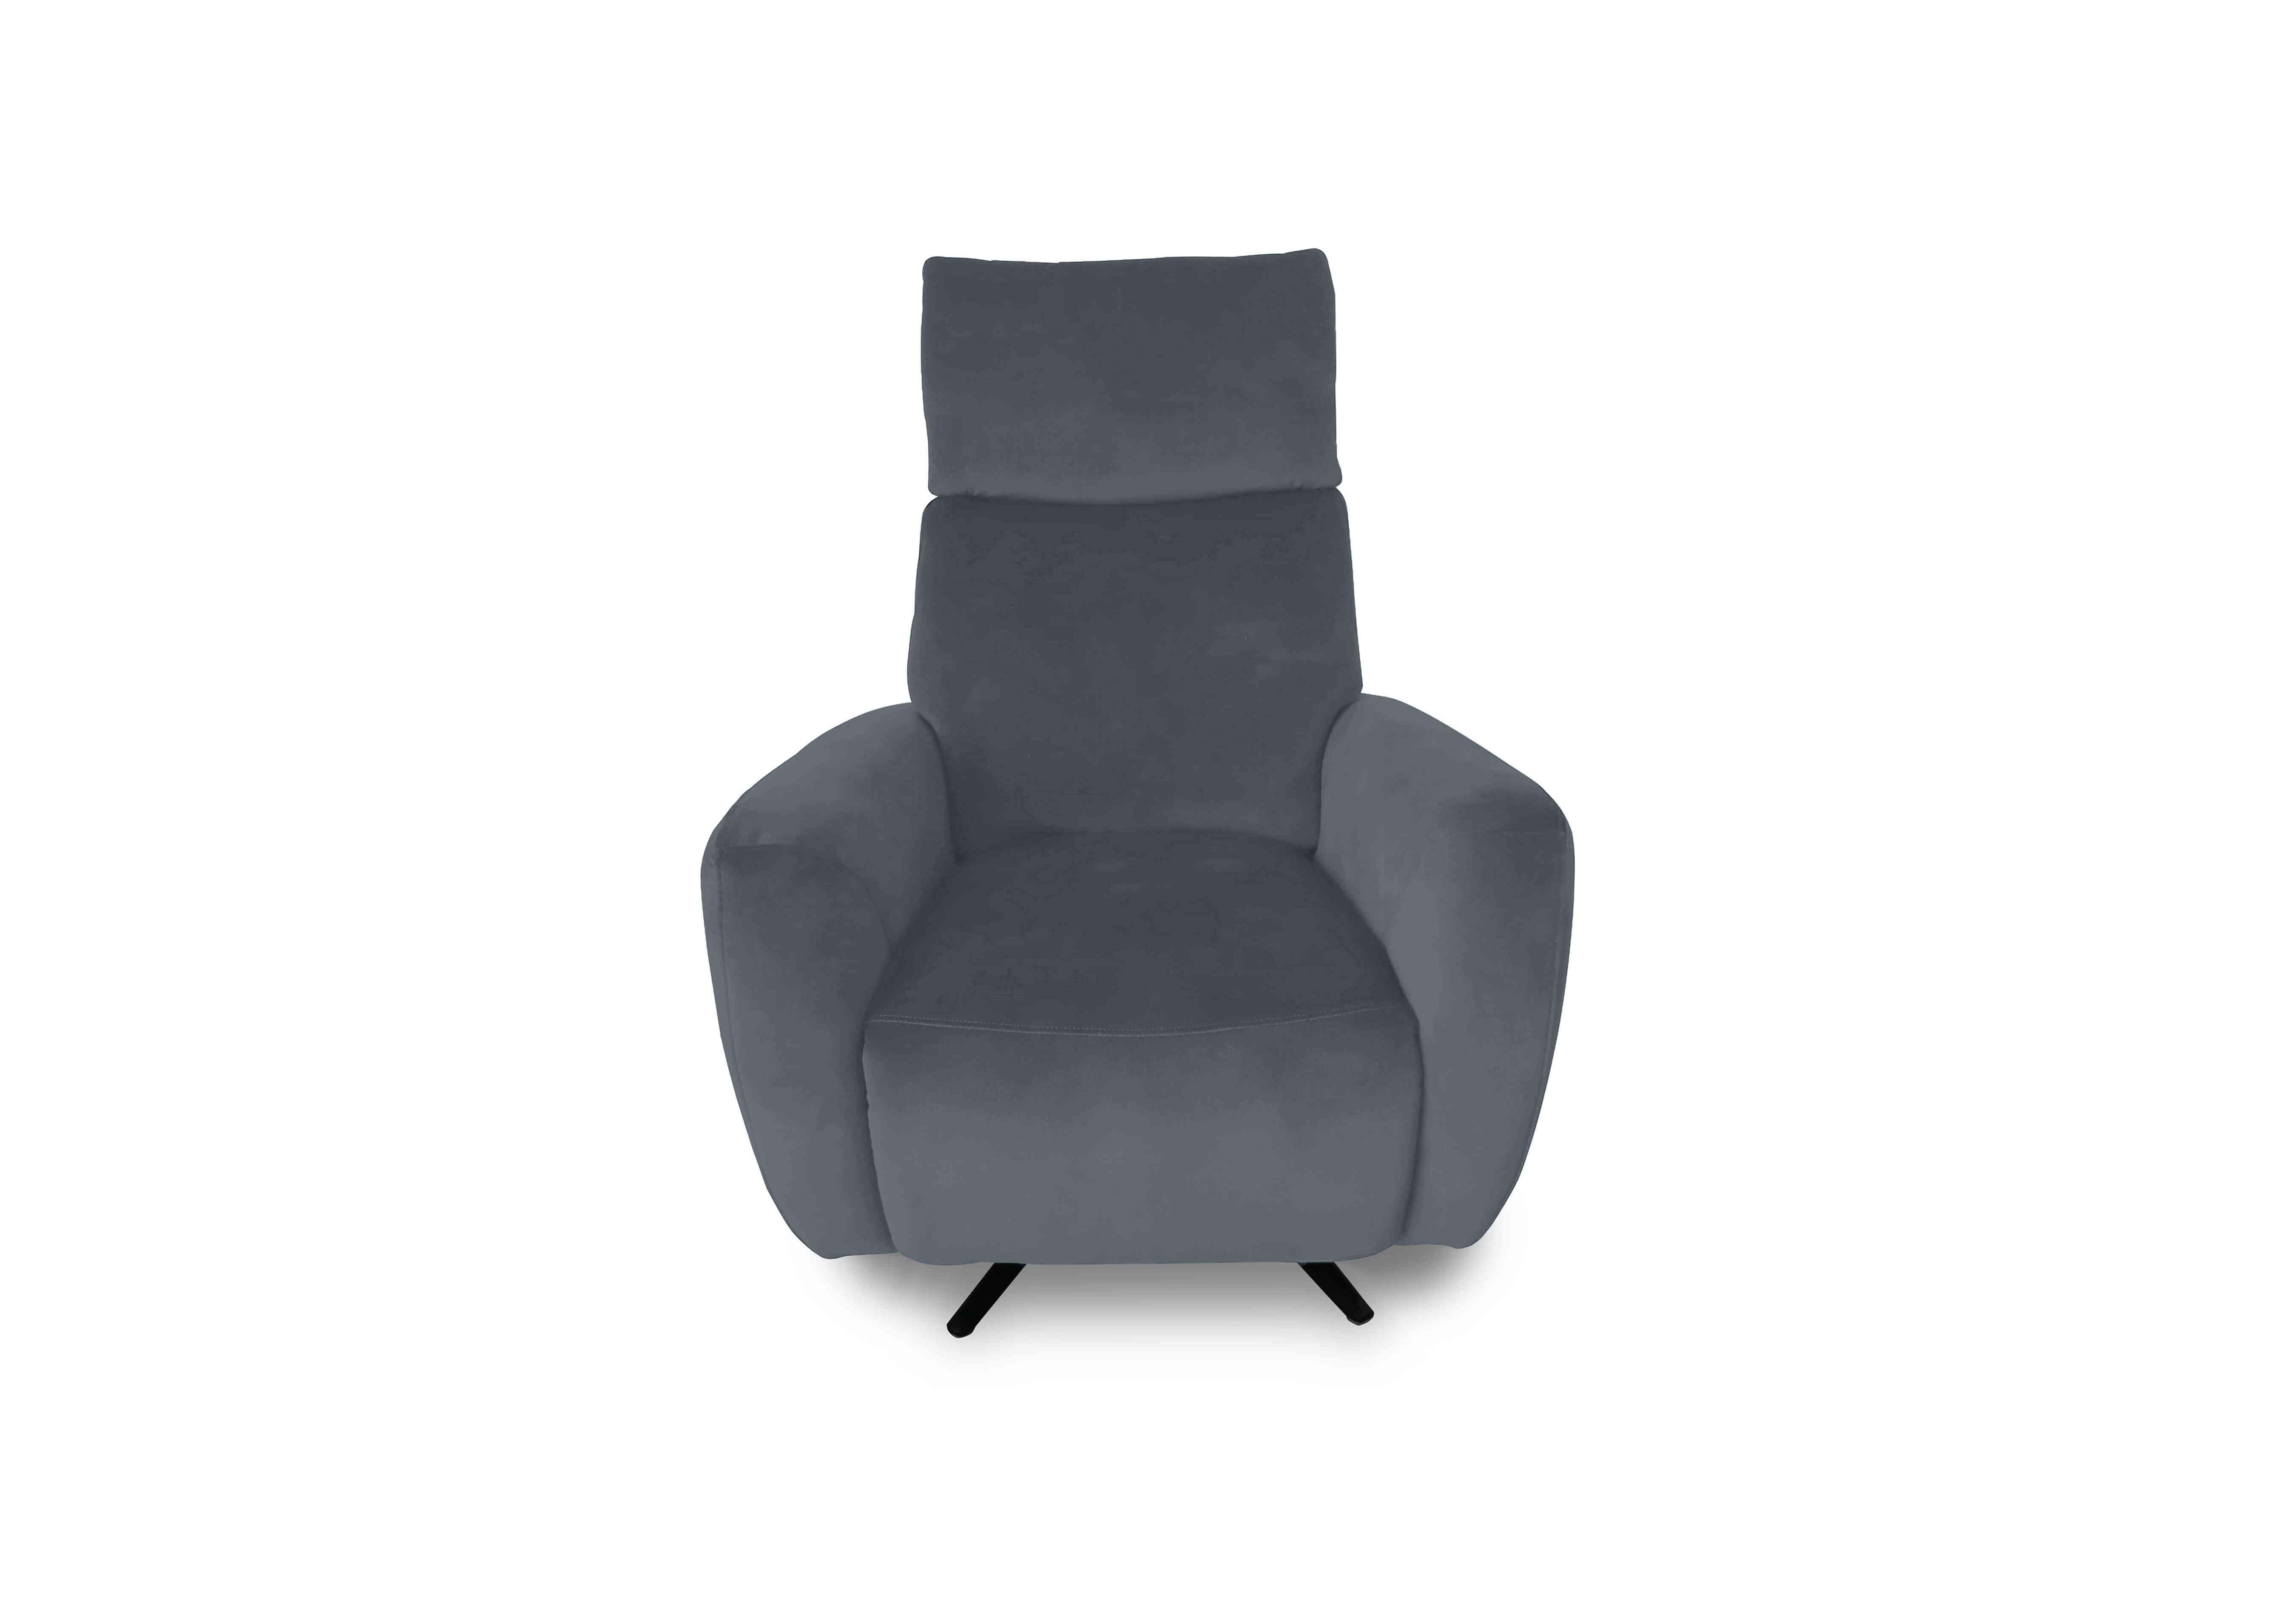 Designer Chair Collection Granada Fabric Power Recliner Swivel Chair with Massage Feature in Fab-Meg-R20 Pewter on Furniture Village